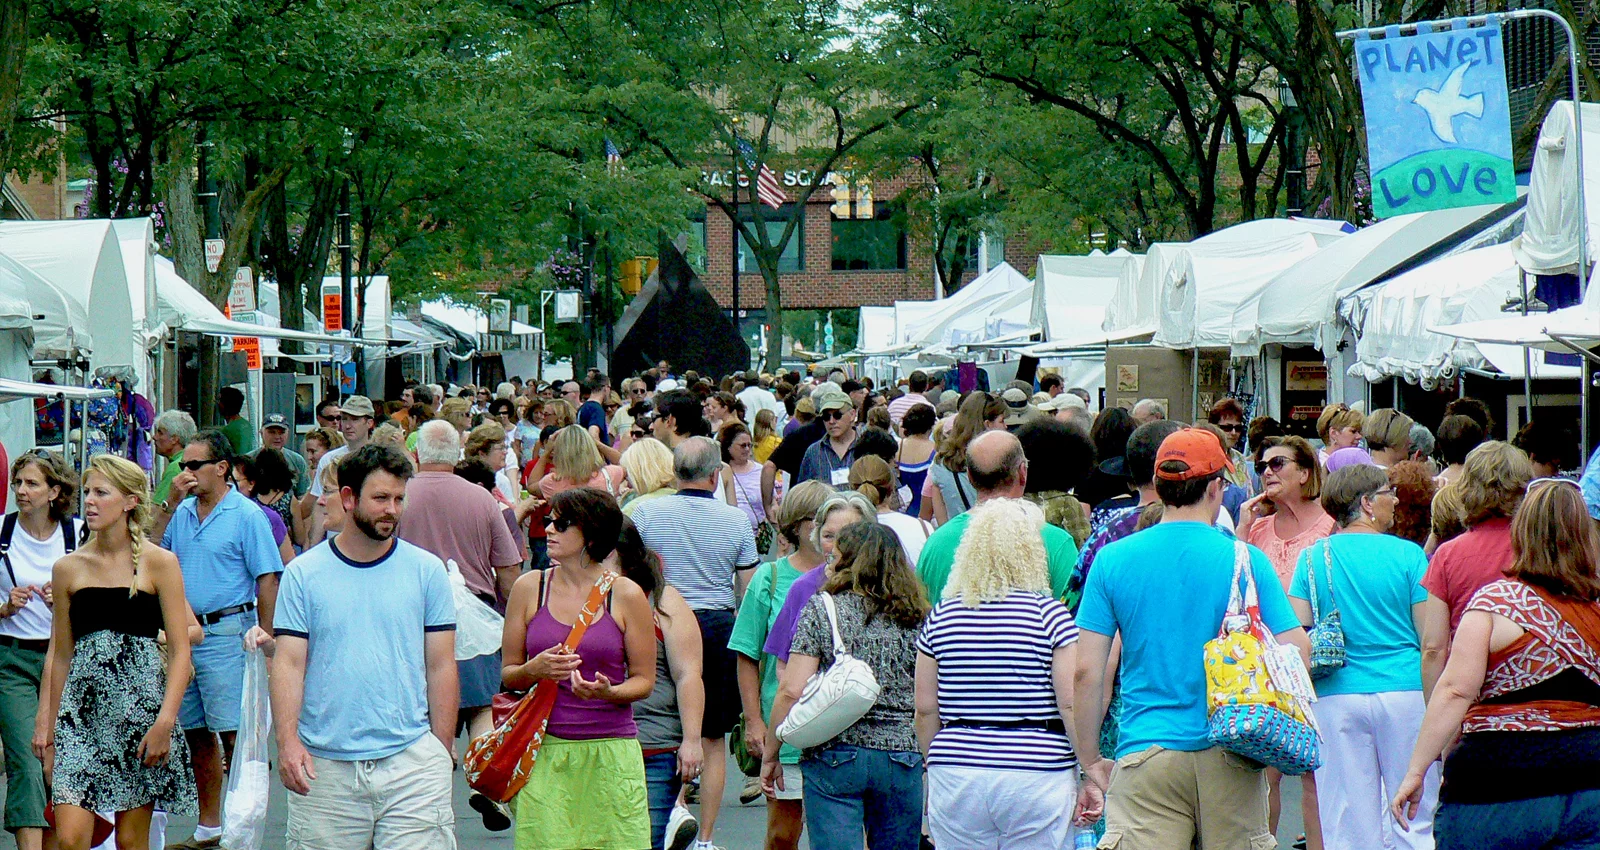 AmeriCU Syracuse Arts & Crafts Festival | Three-day showcase of art exhibits, music performances, summer refreshments and fun activities. | Photo Courtesy of Downstown Committee of Syracuse, Inc.